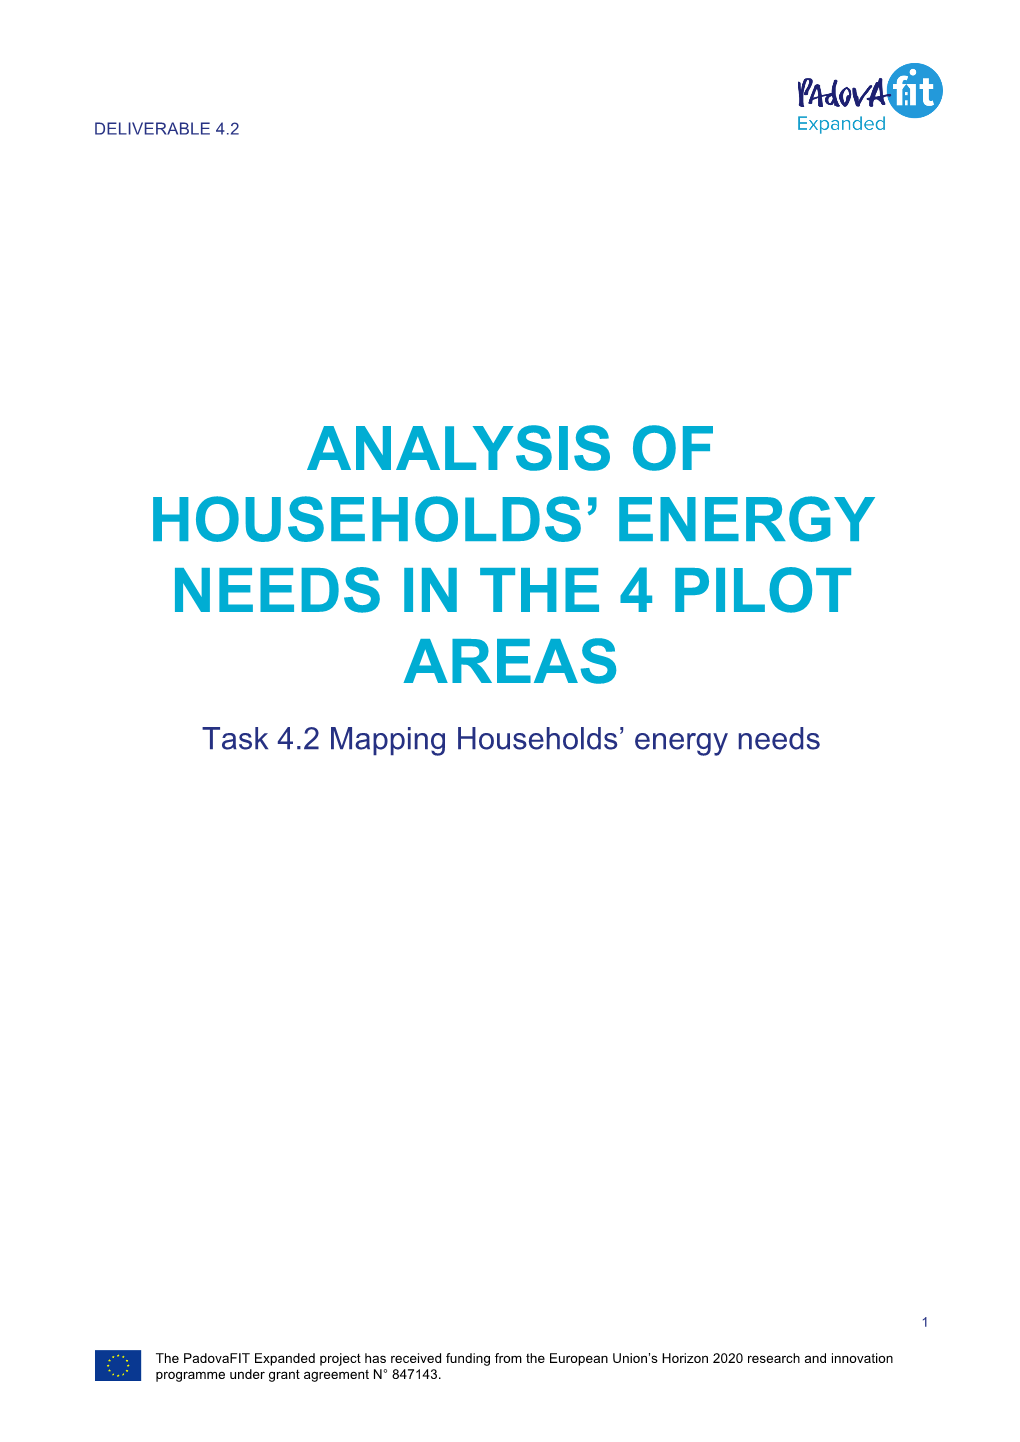 Analysis of Households' Energy Needs in the 4 Pilot